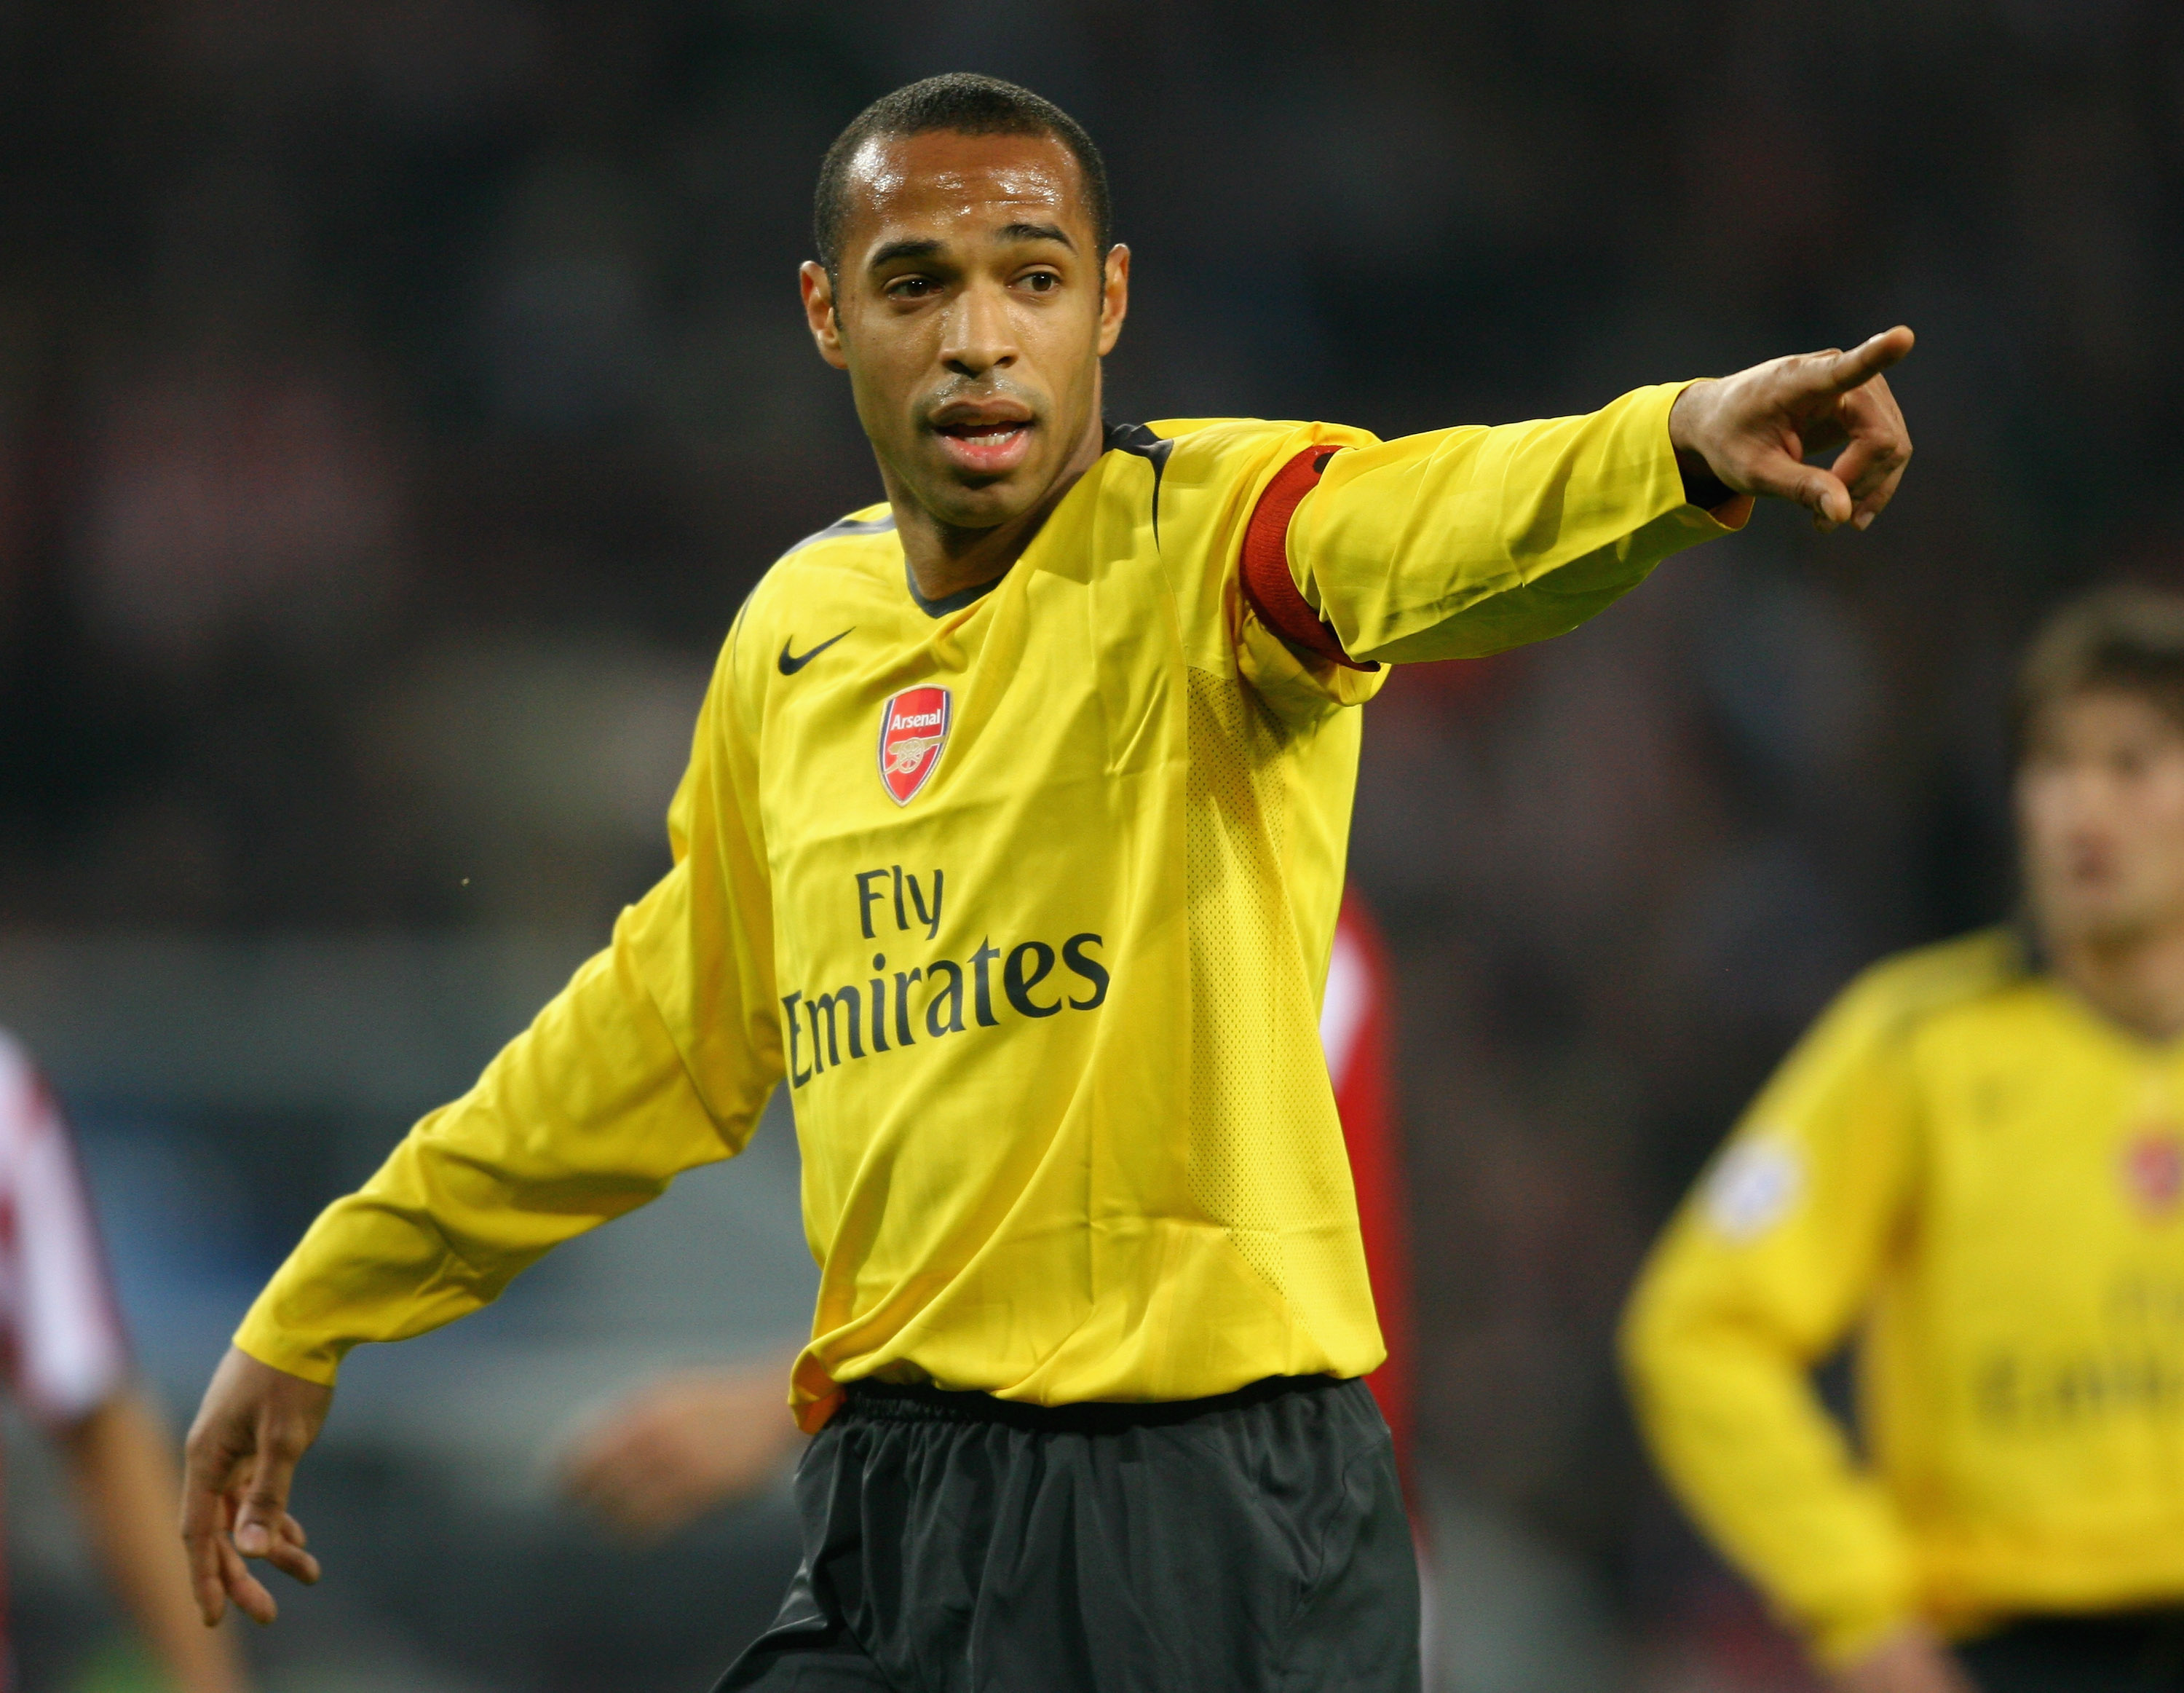 EINDHOVEN, NETHERLANDS - FEBRUARY 20:  Thierry Henry of Arsenal points during the UEFA Champions League Round of 16, first leg between PSV Eindhoven and Arsenal at the Philips Stadium on February 20, 2007 in Eindhoven, Netherlands.  (Photo by Shaun Botter